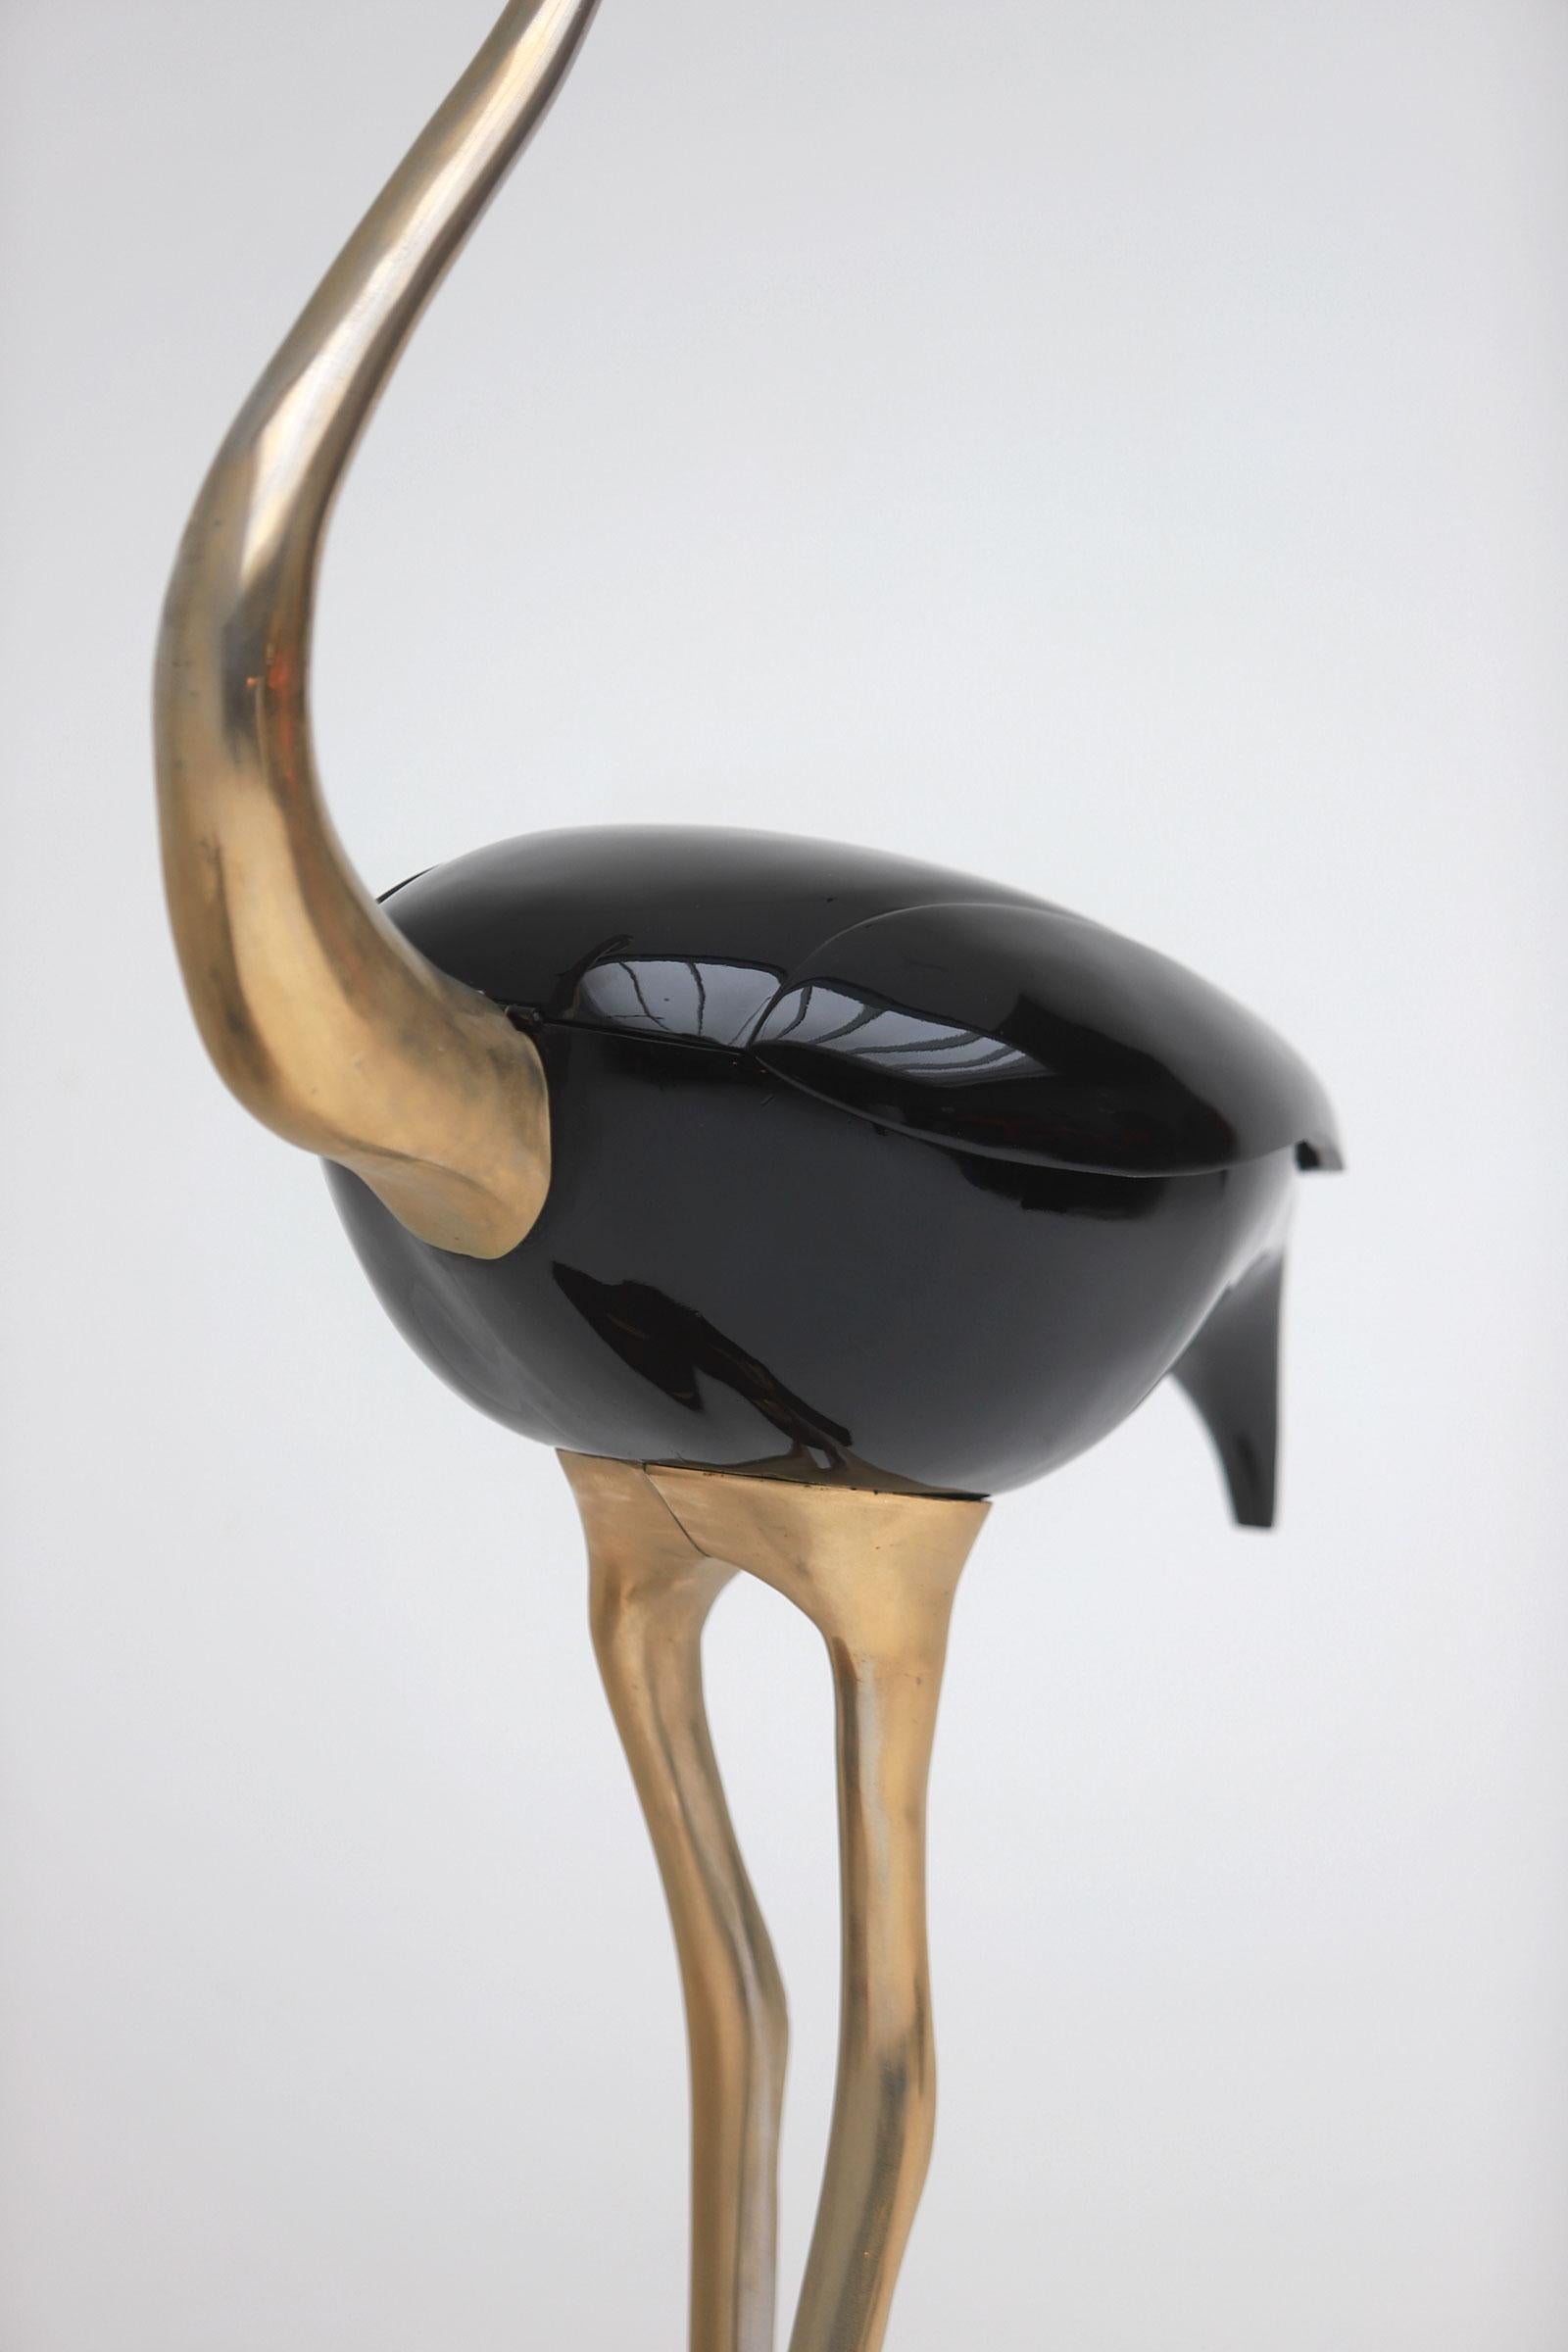 Lifesize Brass Flamingo with storage compartment by Fondica 1970s For Sale 6